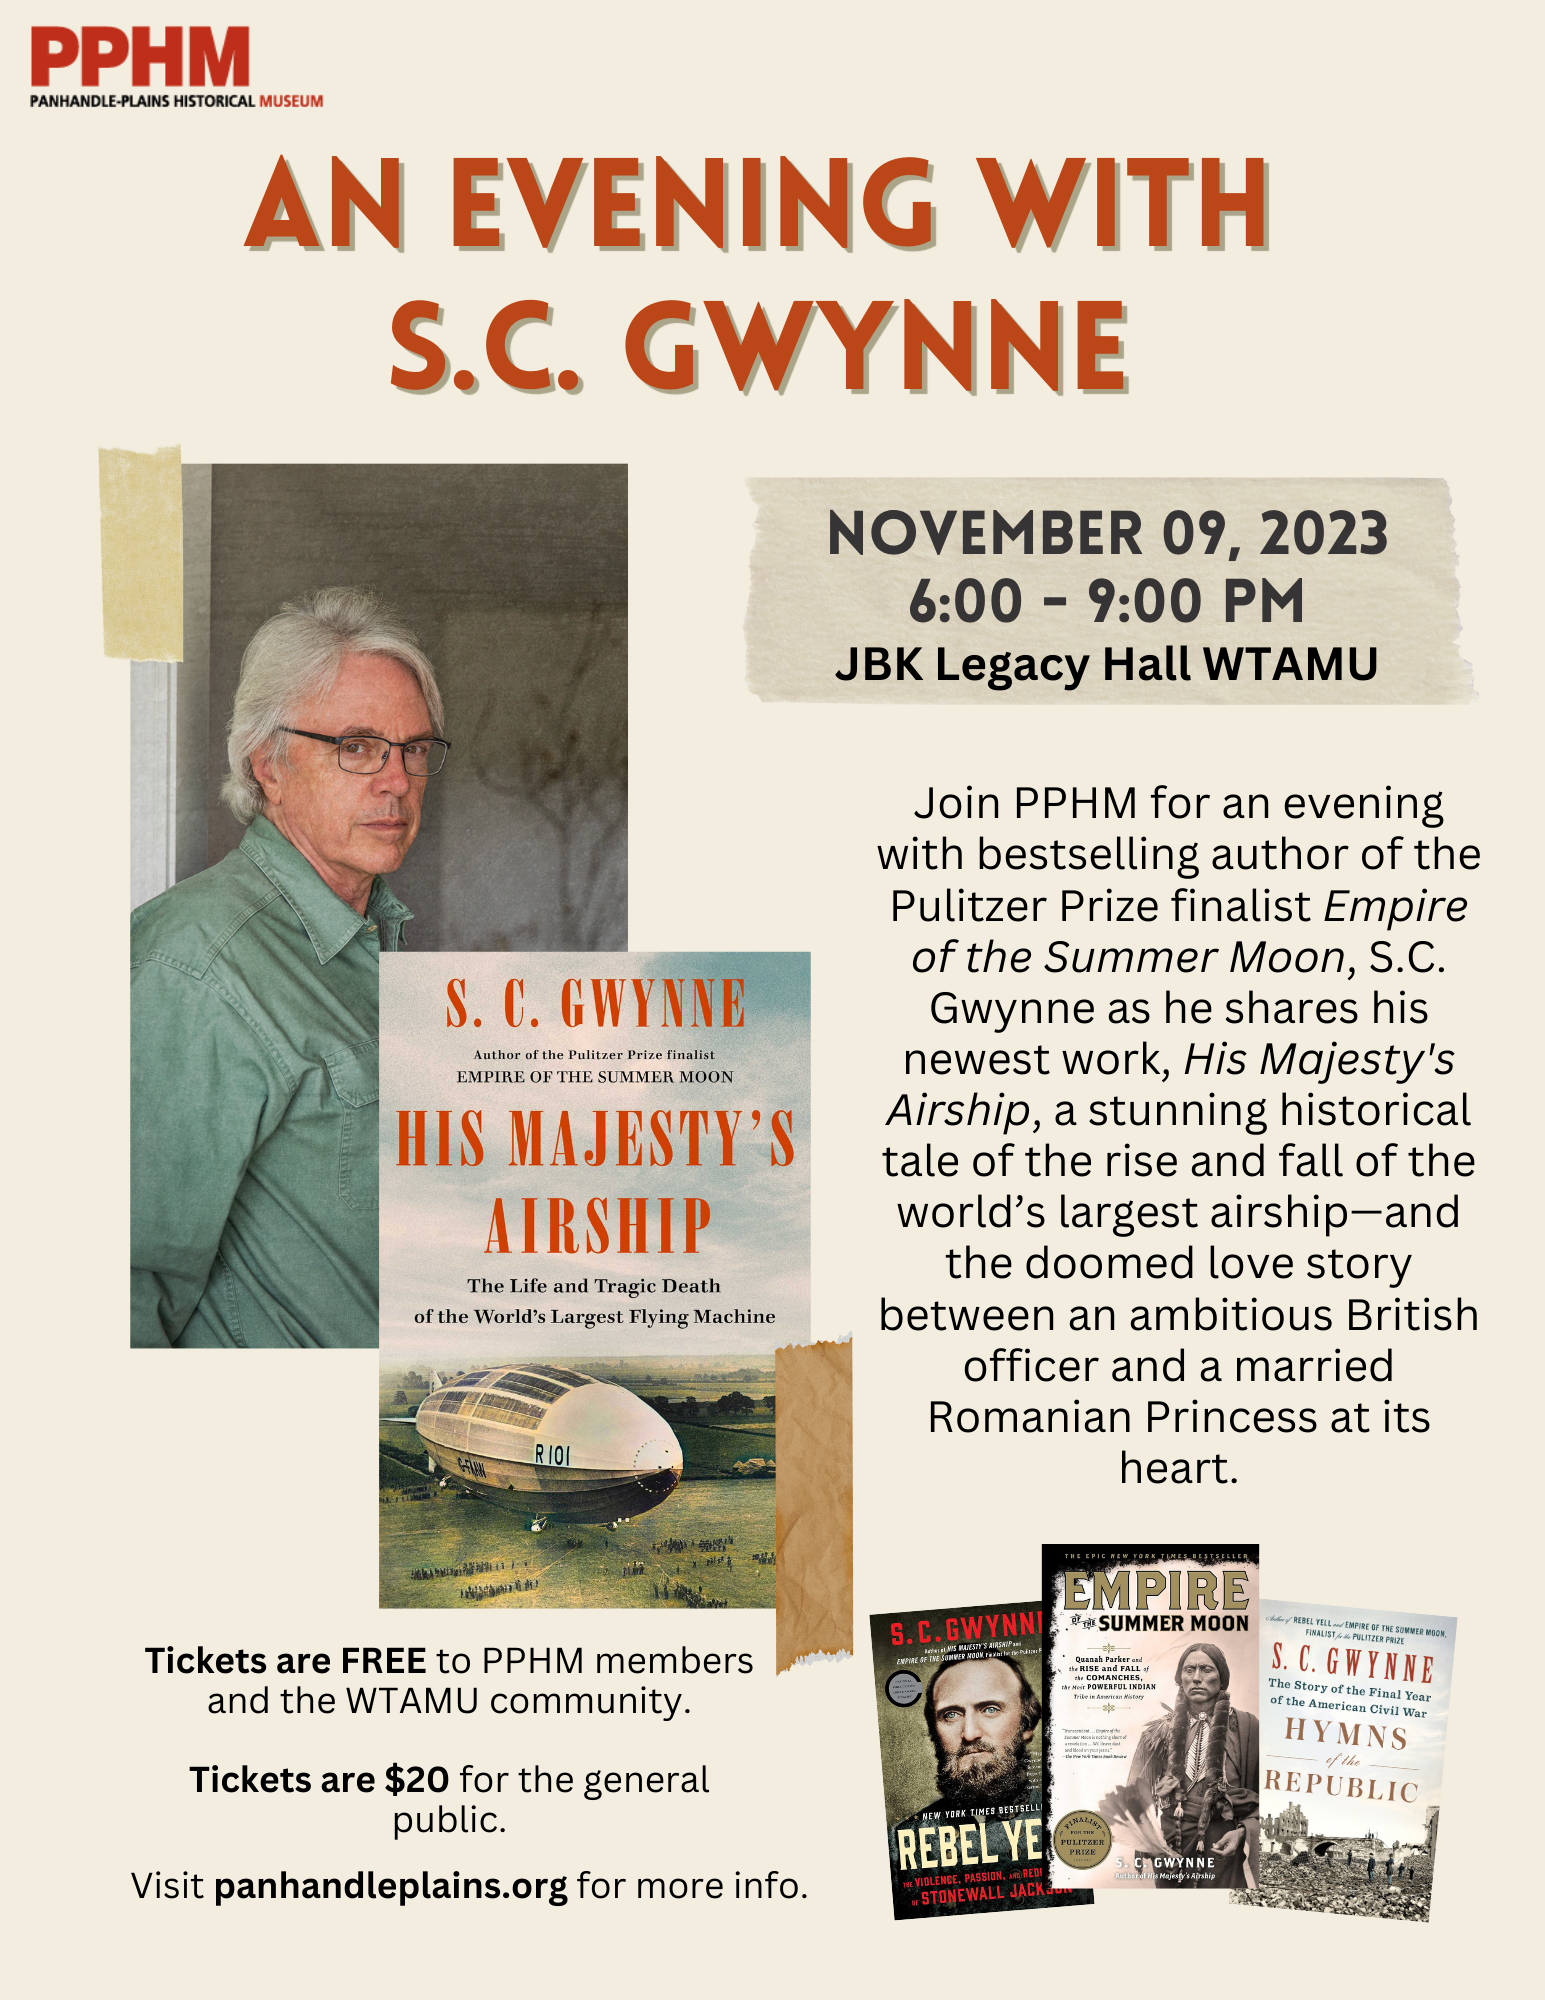 An Evening with S.C. Gwynne @ An Evening with S.C. Gwynne | Canyon | Texas | United States